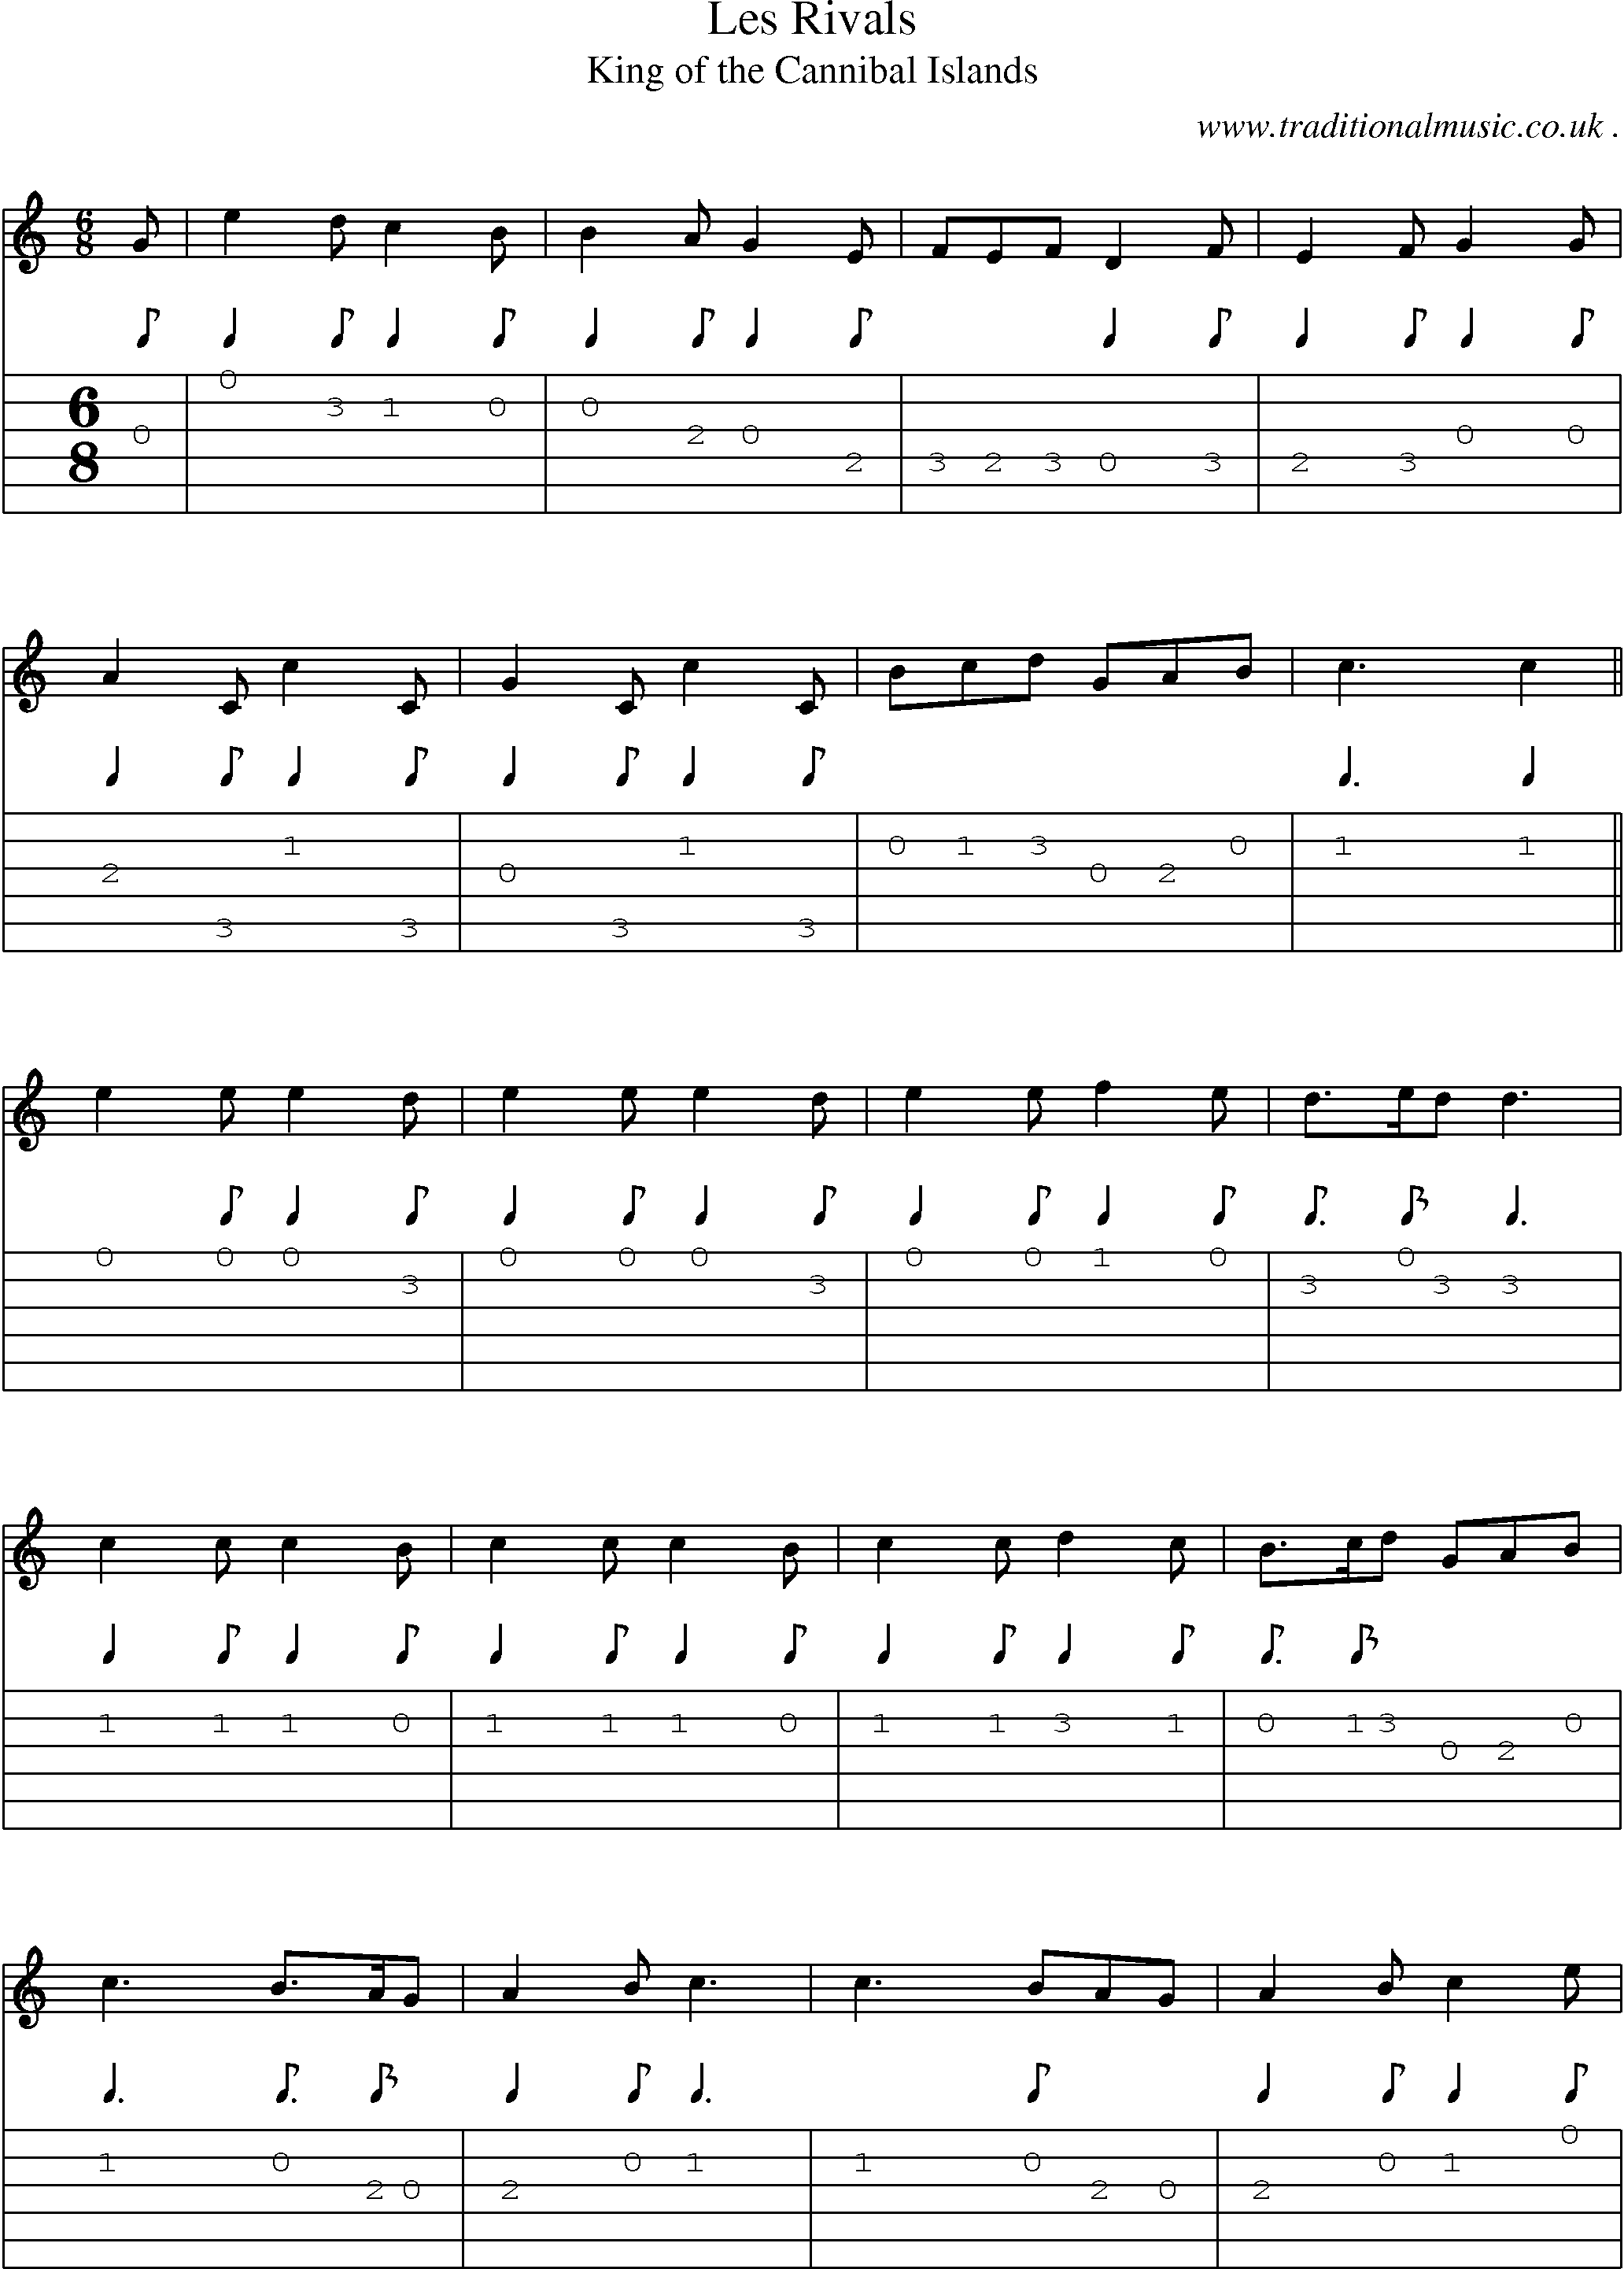 Sheet-Music and Guitar Tabs for Les Rivals